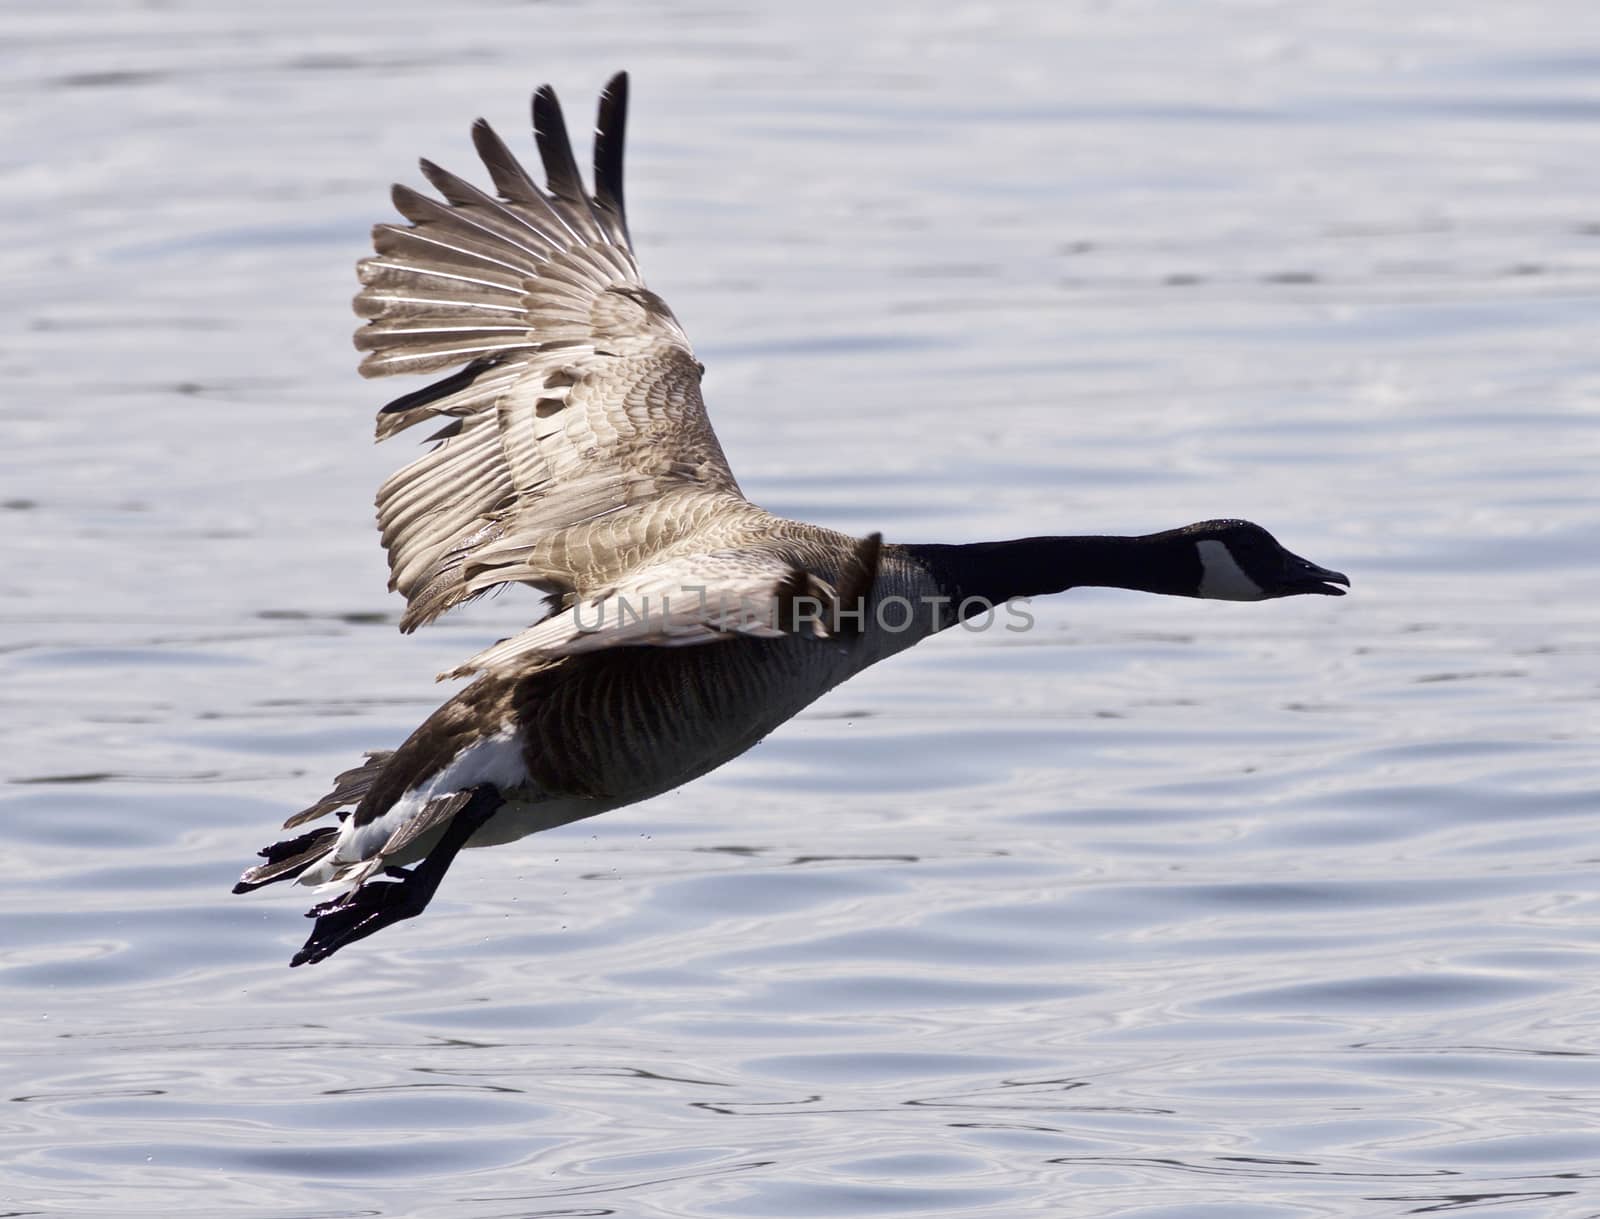 Beautiful isolated photo of a Canada goose taking off from the water